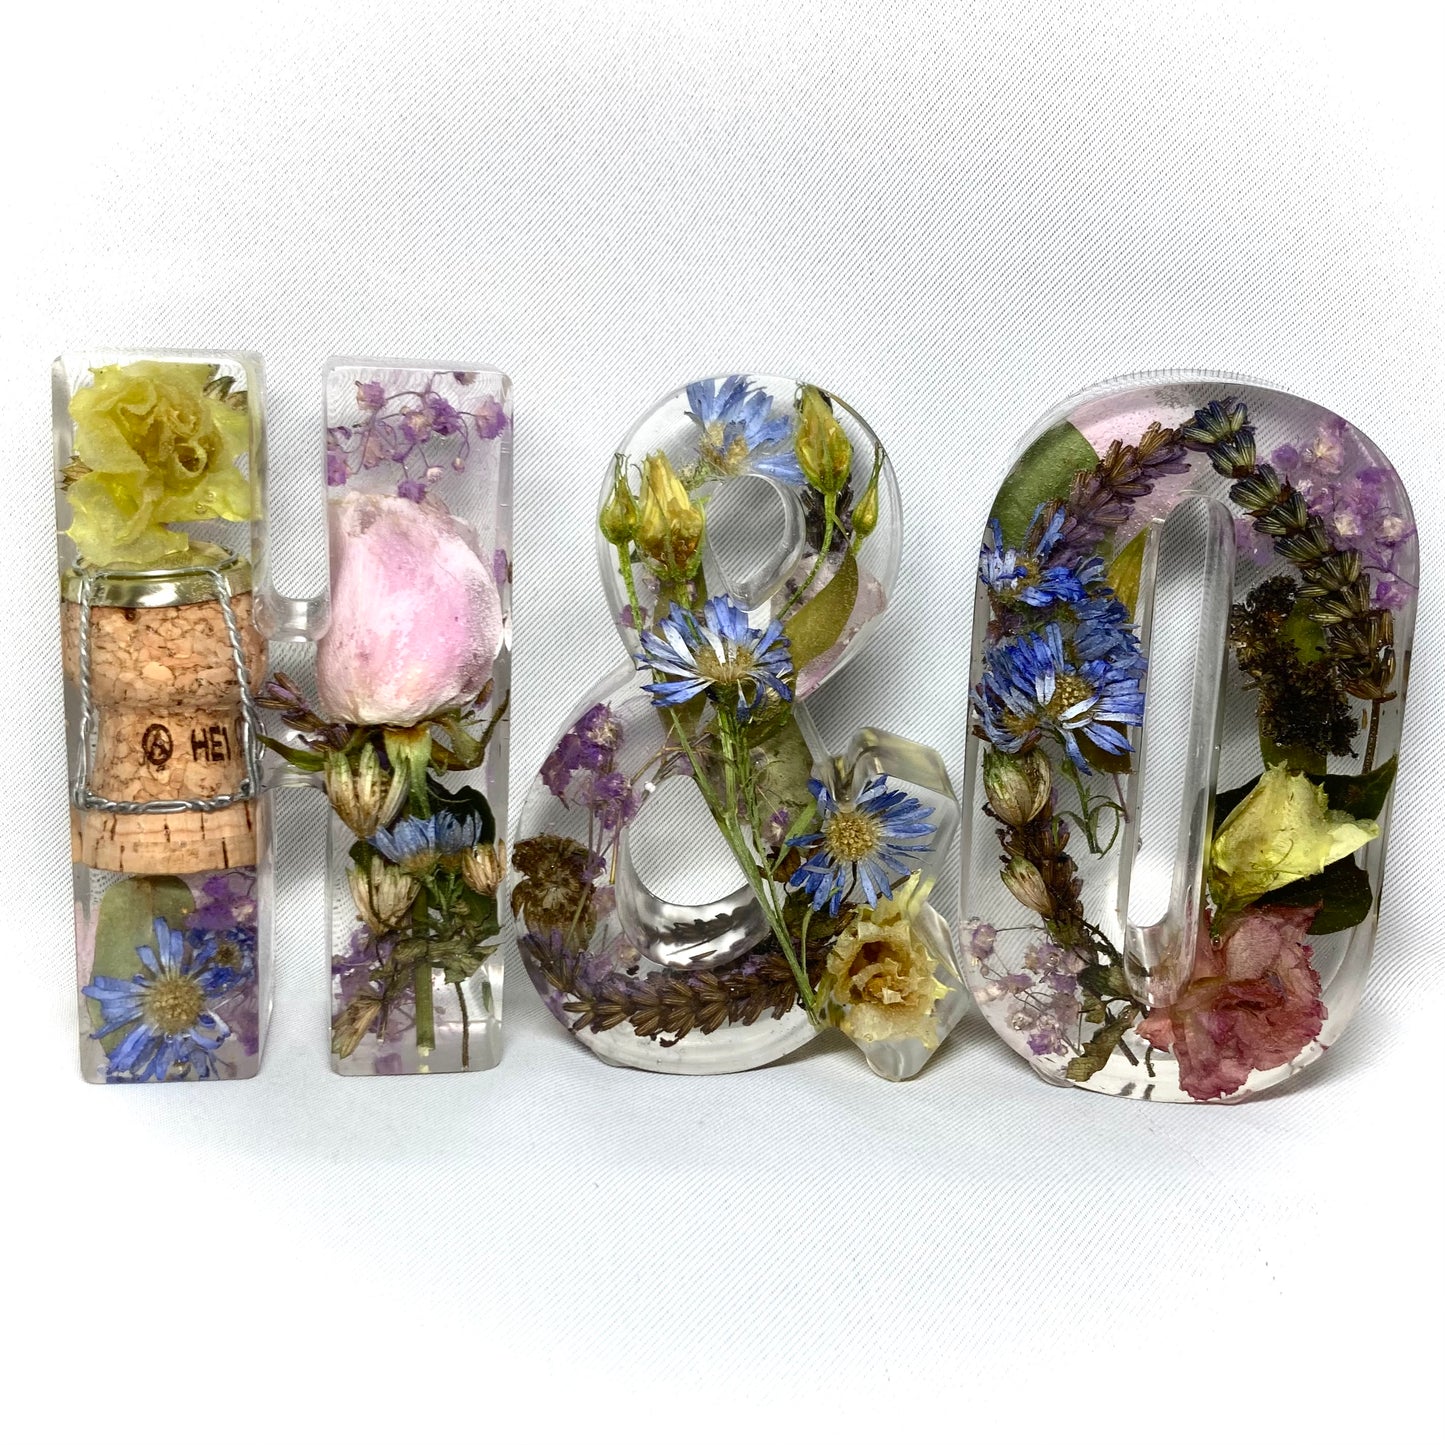 Flower Preservation two 11cm letters and an ampersand